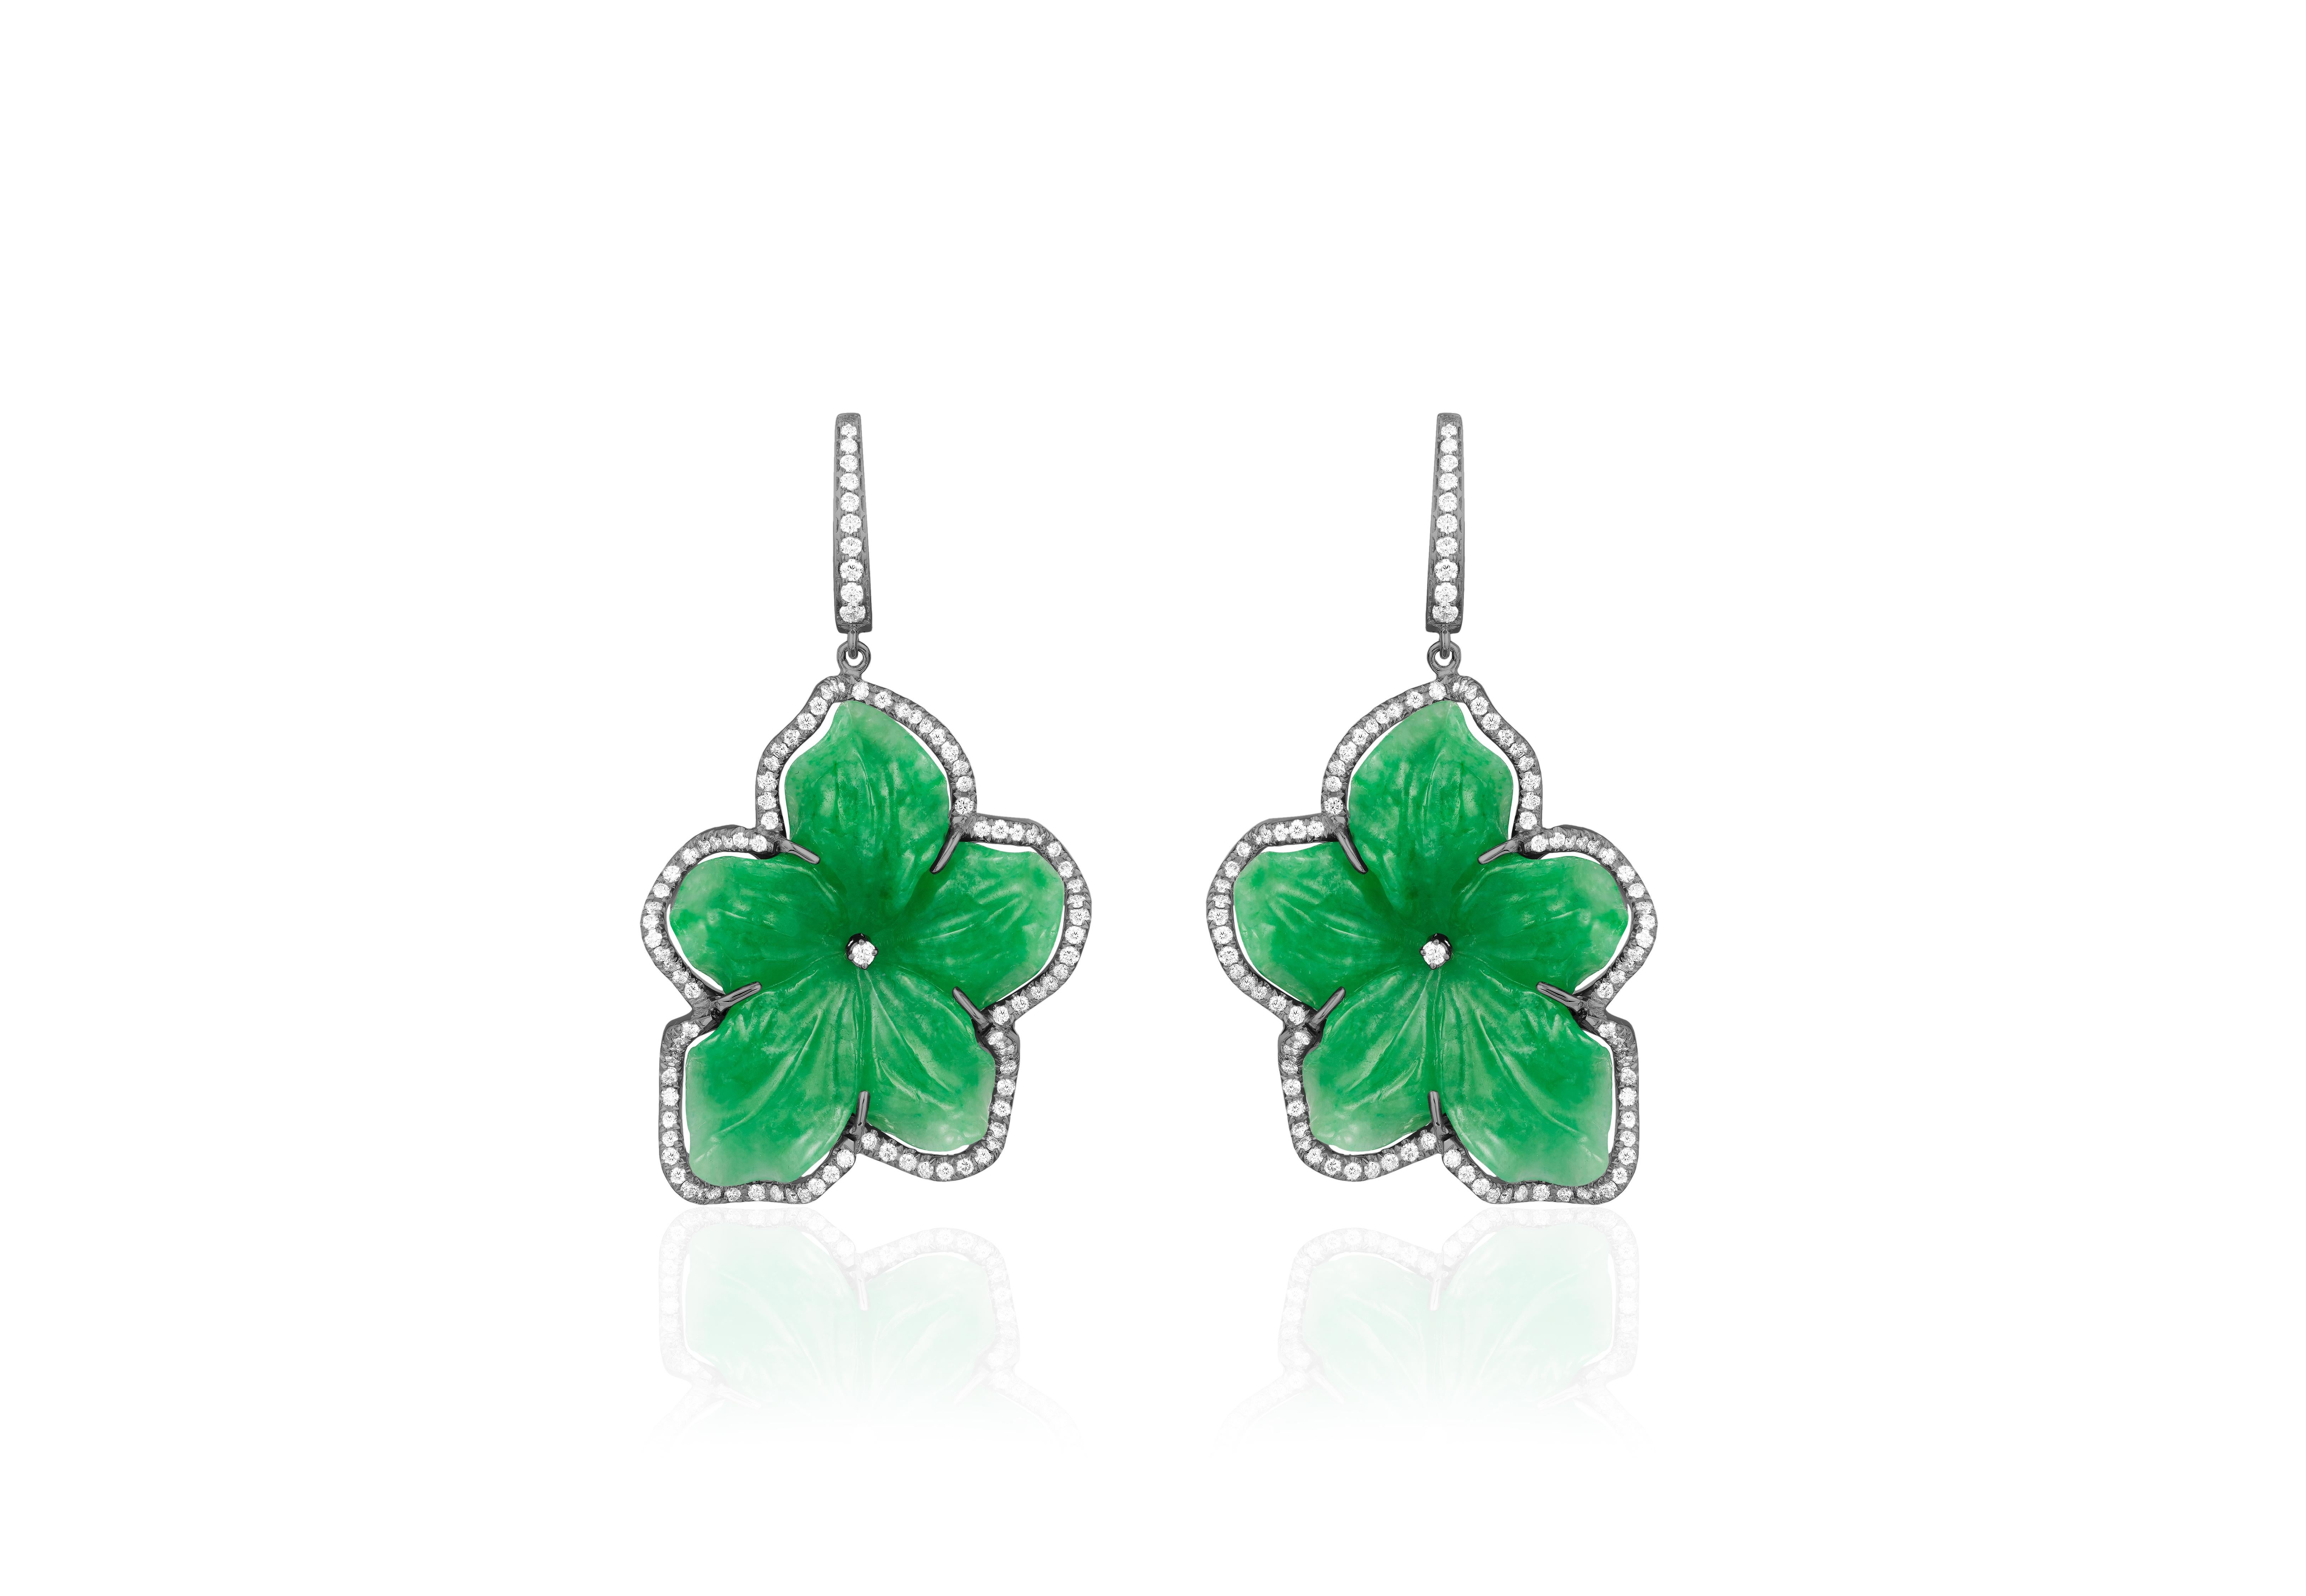 Flower Shape Carved Jade Earrings with Diamonds in 18k White Gold, from 'G=One' Collection

Gemstone Weight: Jade: 50.08 Carats

Diamond: G-H / VS, Approx Wt: 1.55 Carats